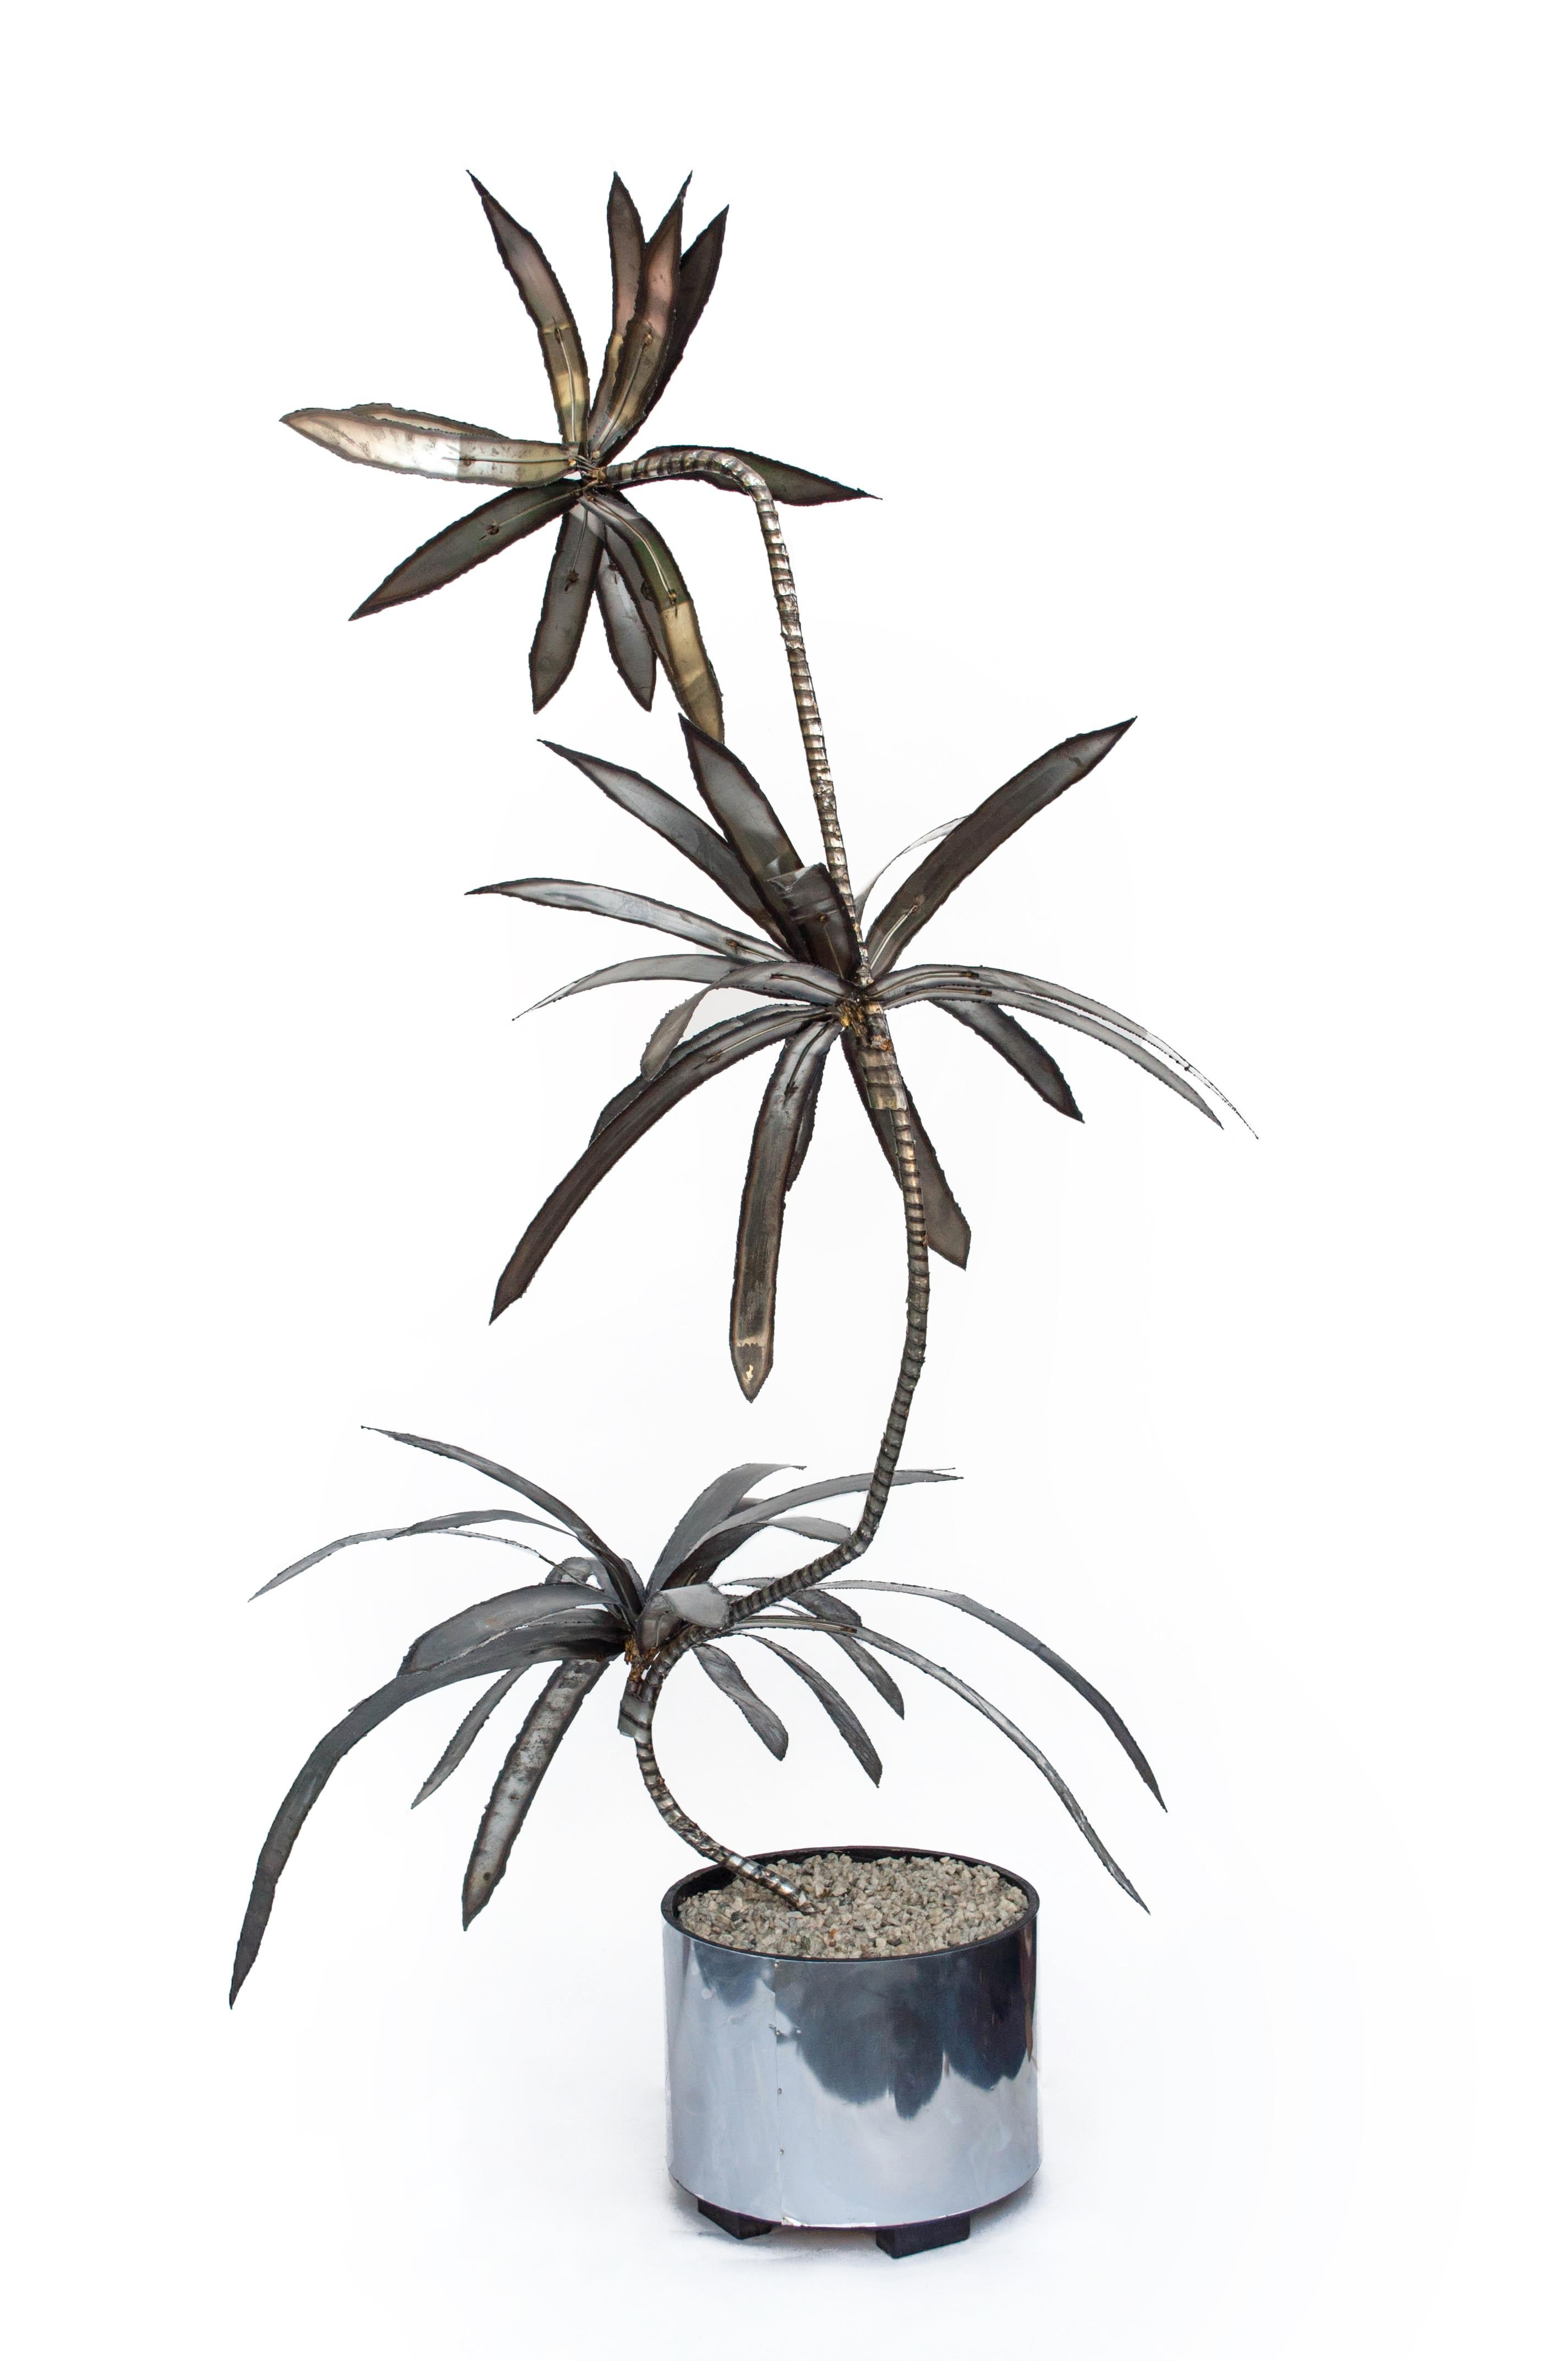 Talk about a total looker, this one-of-a-kind vintage torch welded Brutalist tree is a beaut! Impressive at over 6 feet tall, each leaf was torch cut and welded to create this dynamic metal palm tree. The leaves are pliable allowing you to arrange